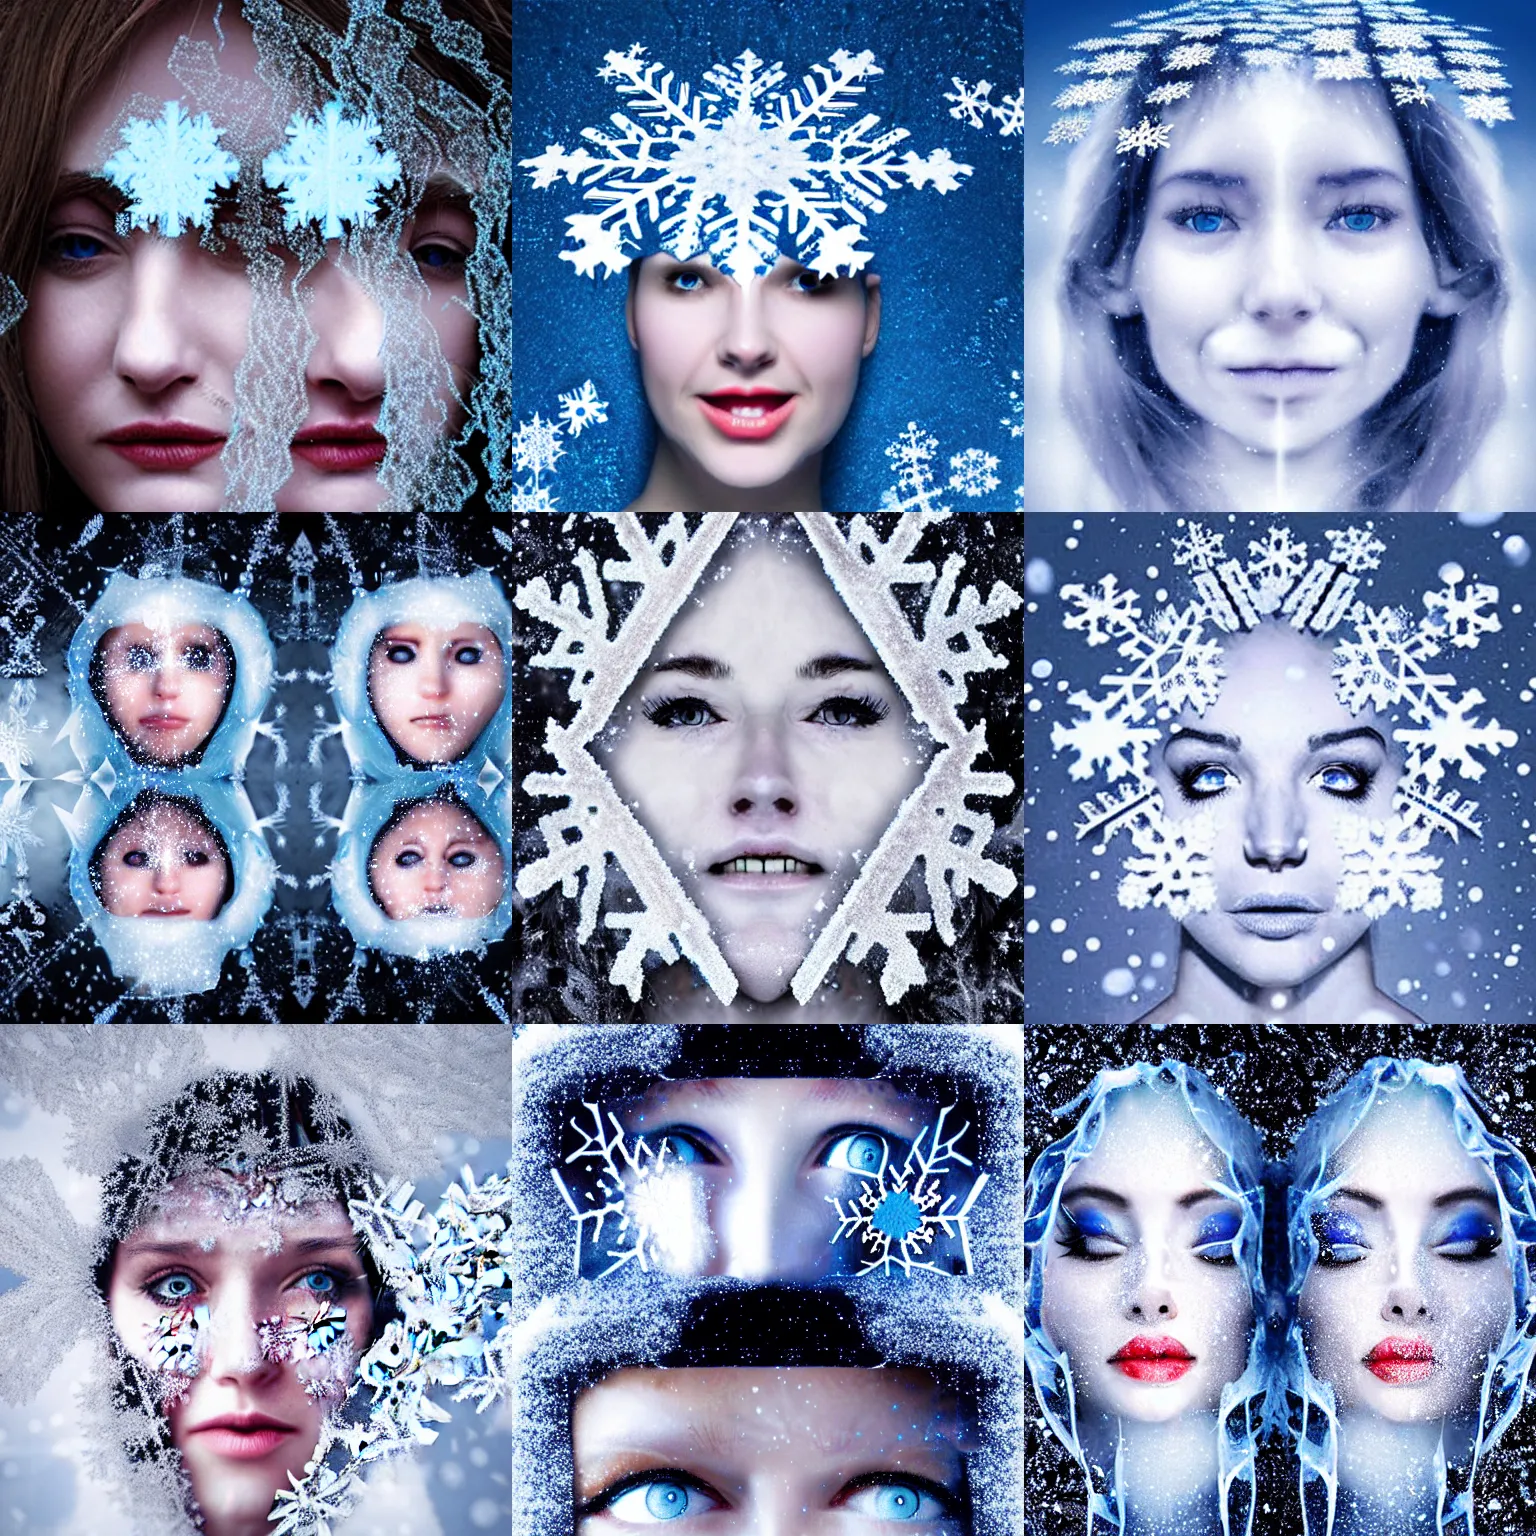 Prompt: surreal photography snowflakes with ice princess faces